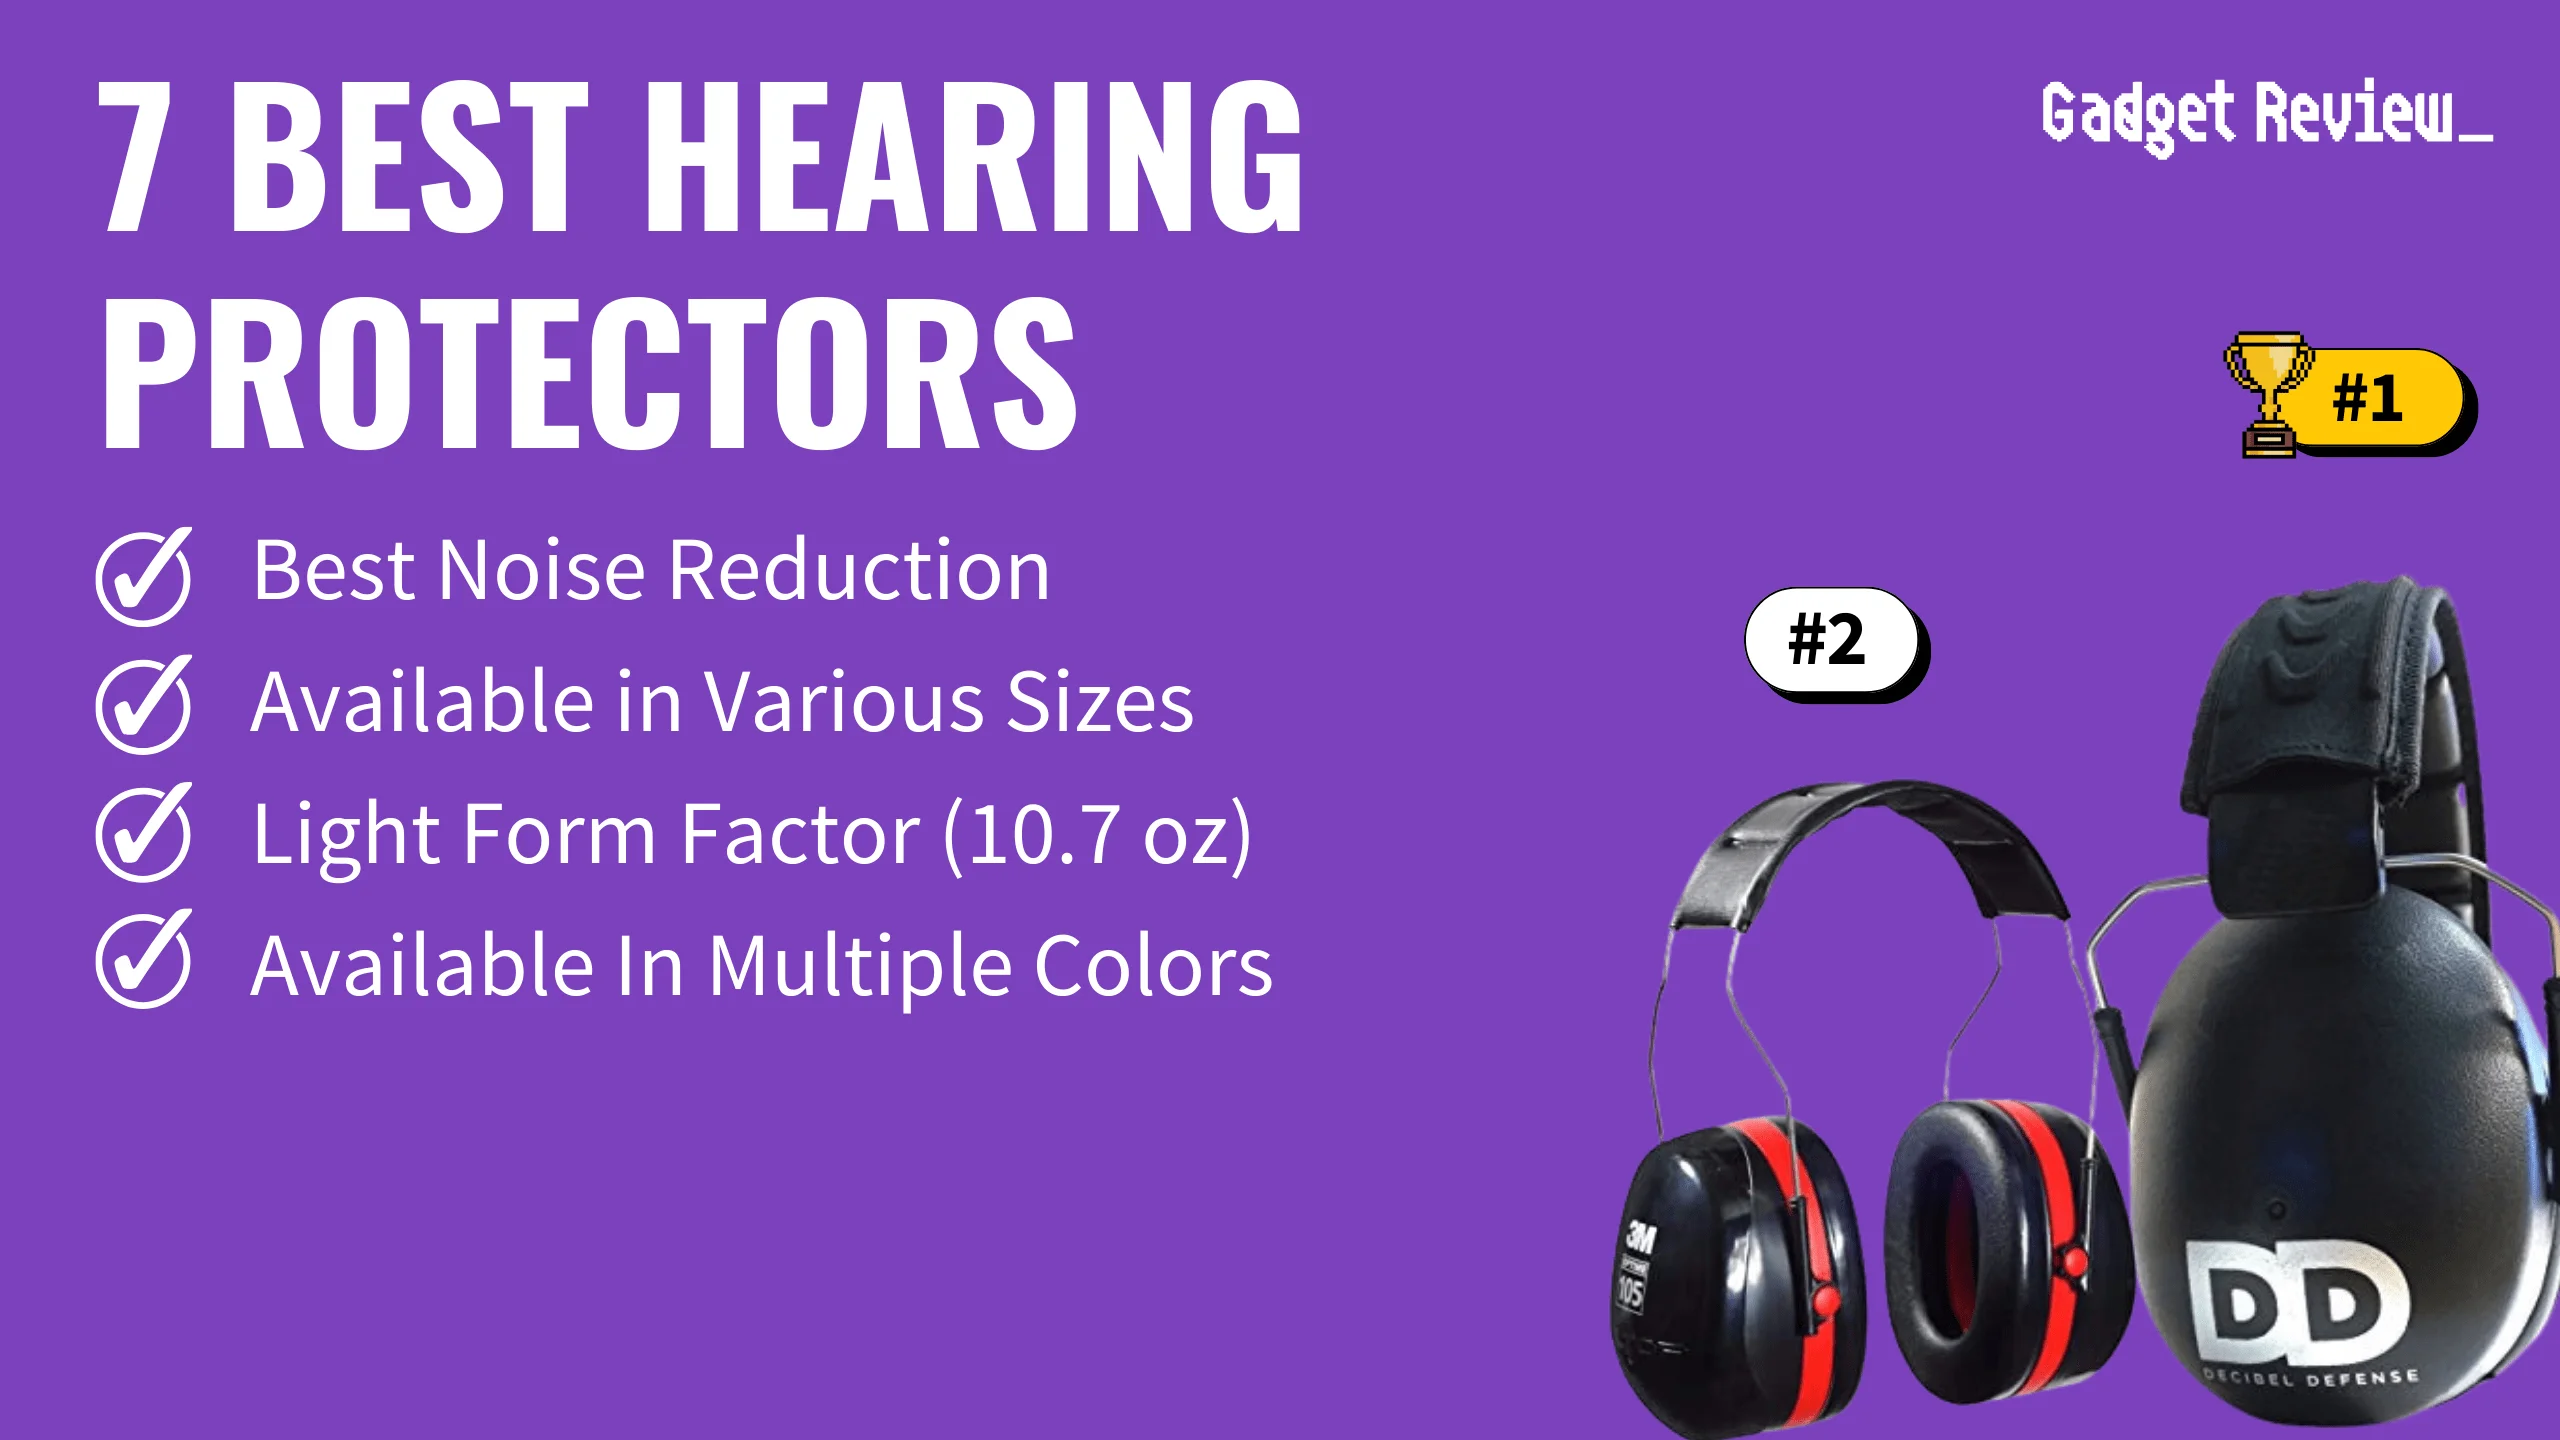 best hearing protectors featured image that shows the top three best tool models